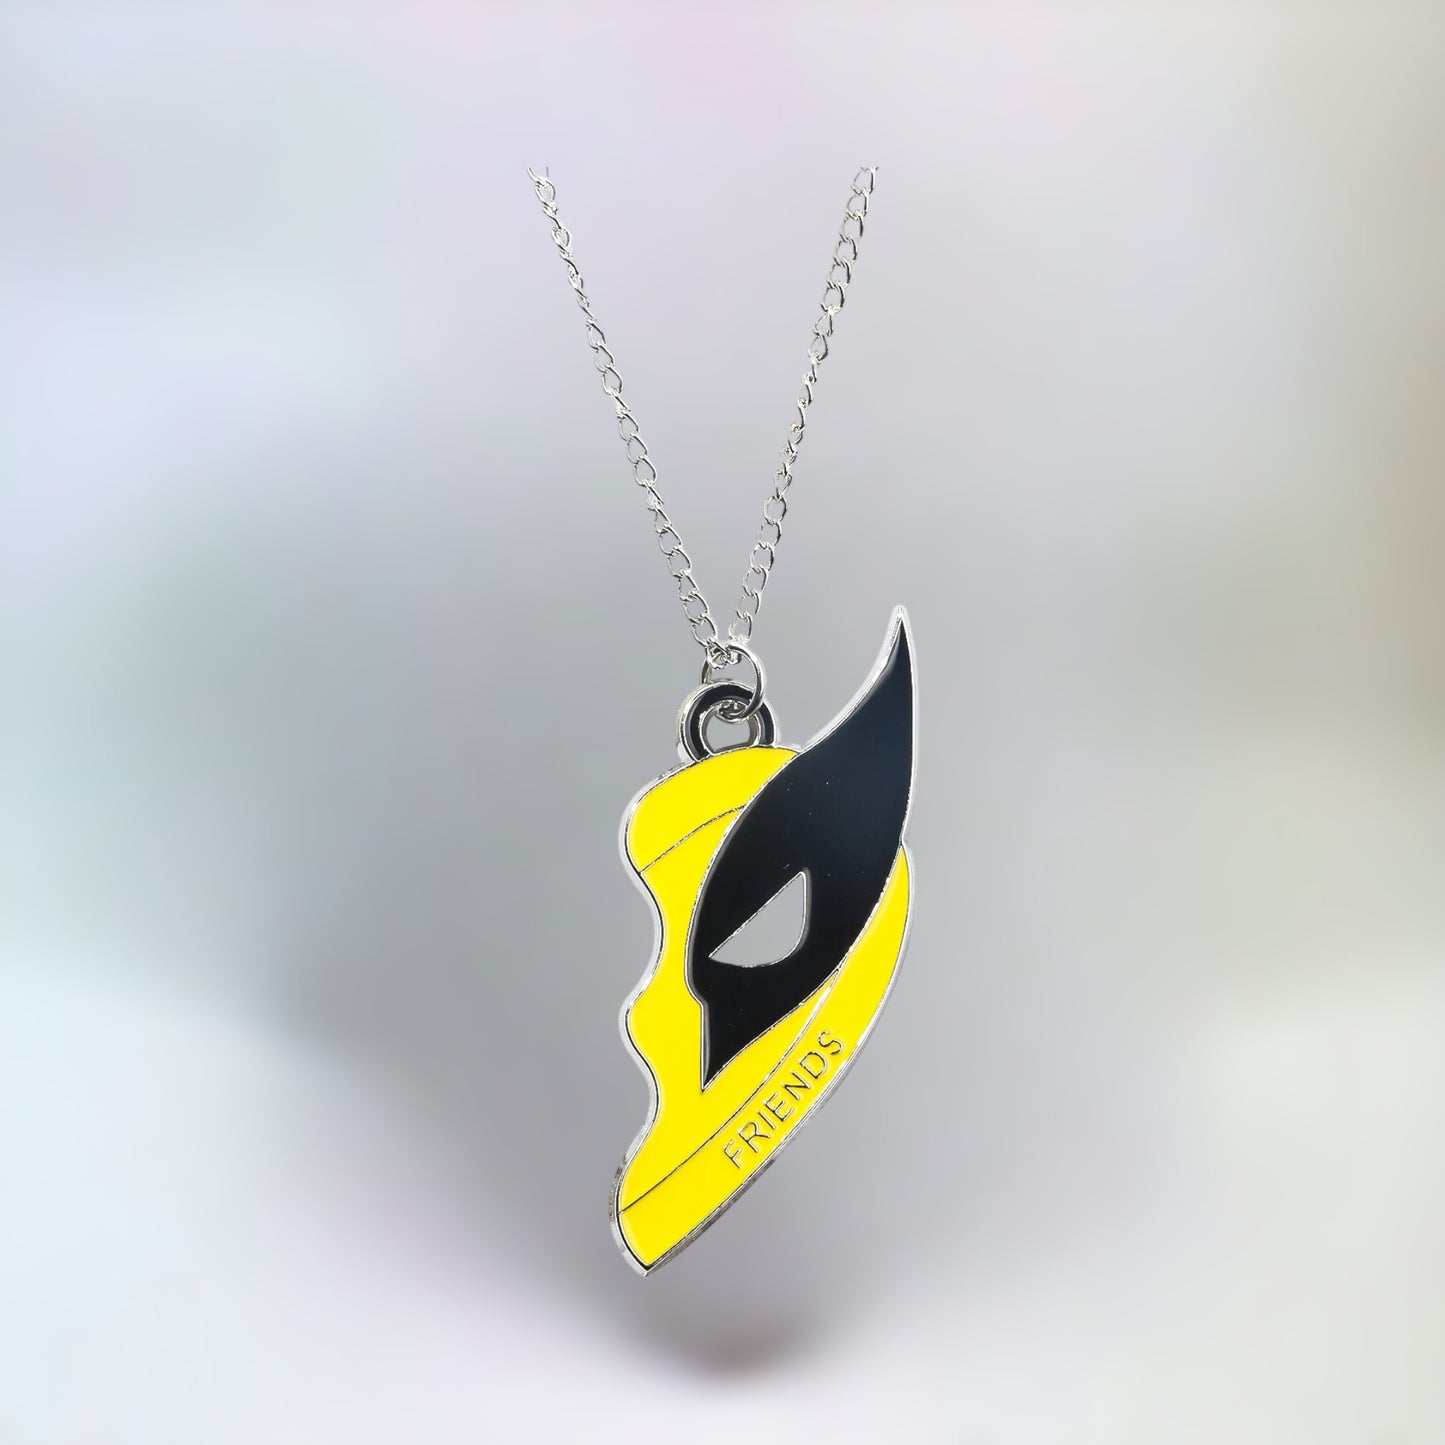 Close-up of the Wolverine pendant from the Deadpool and Wolverine best friends necklace on a plain white background.